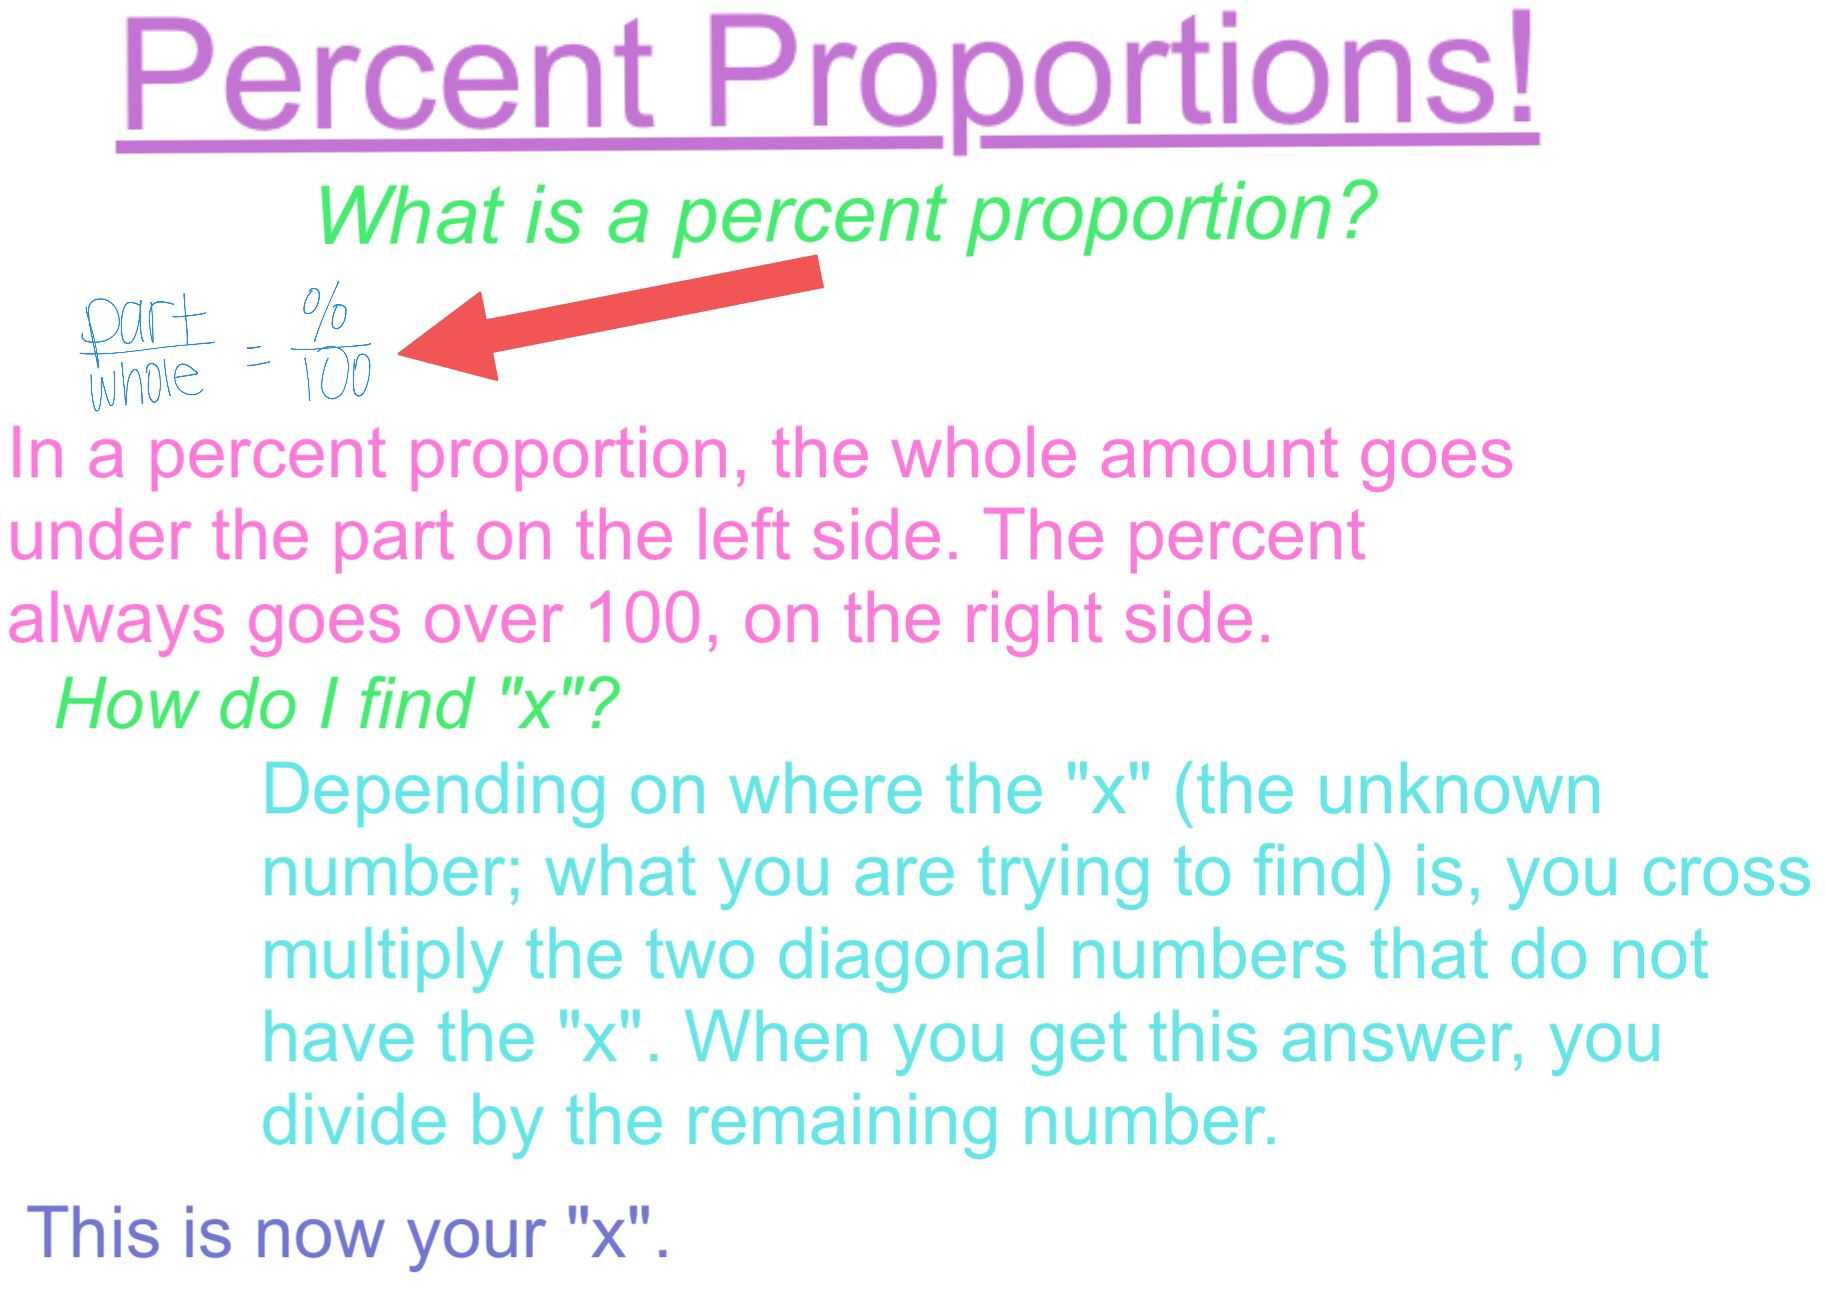 Markup and Discount Worksheet together with Percent Proportions Unit 9 Index Card Percents Pinterest